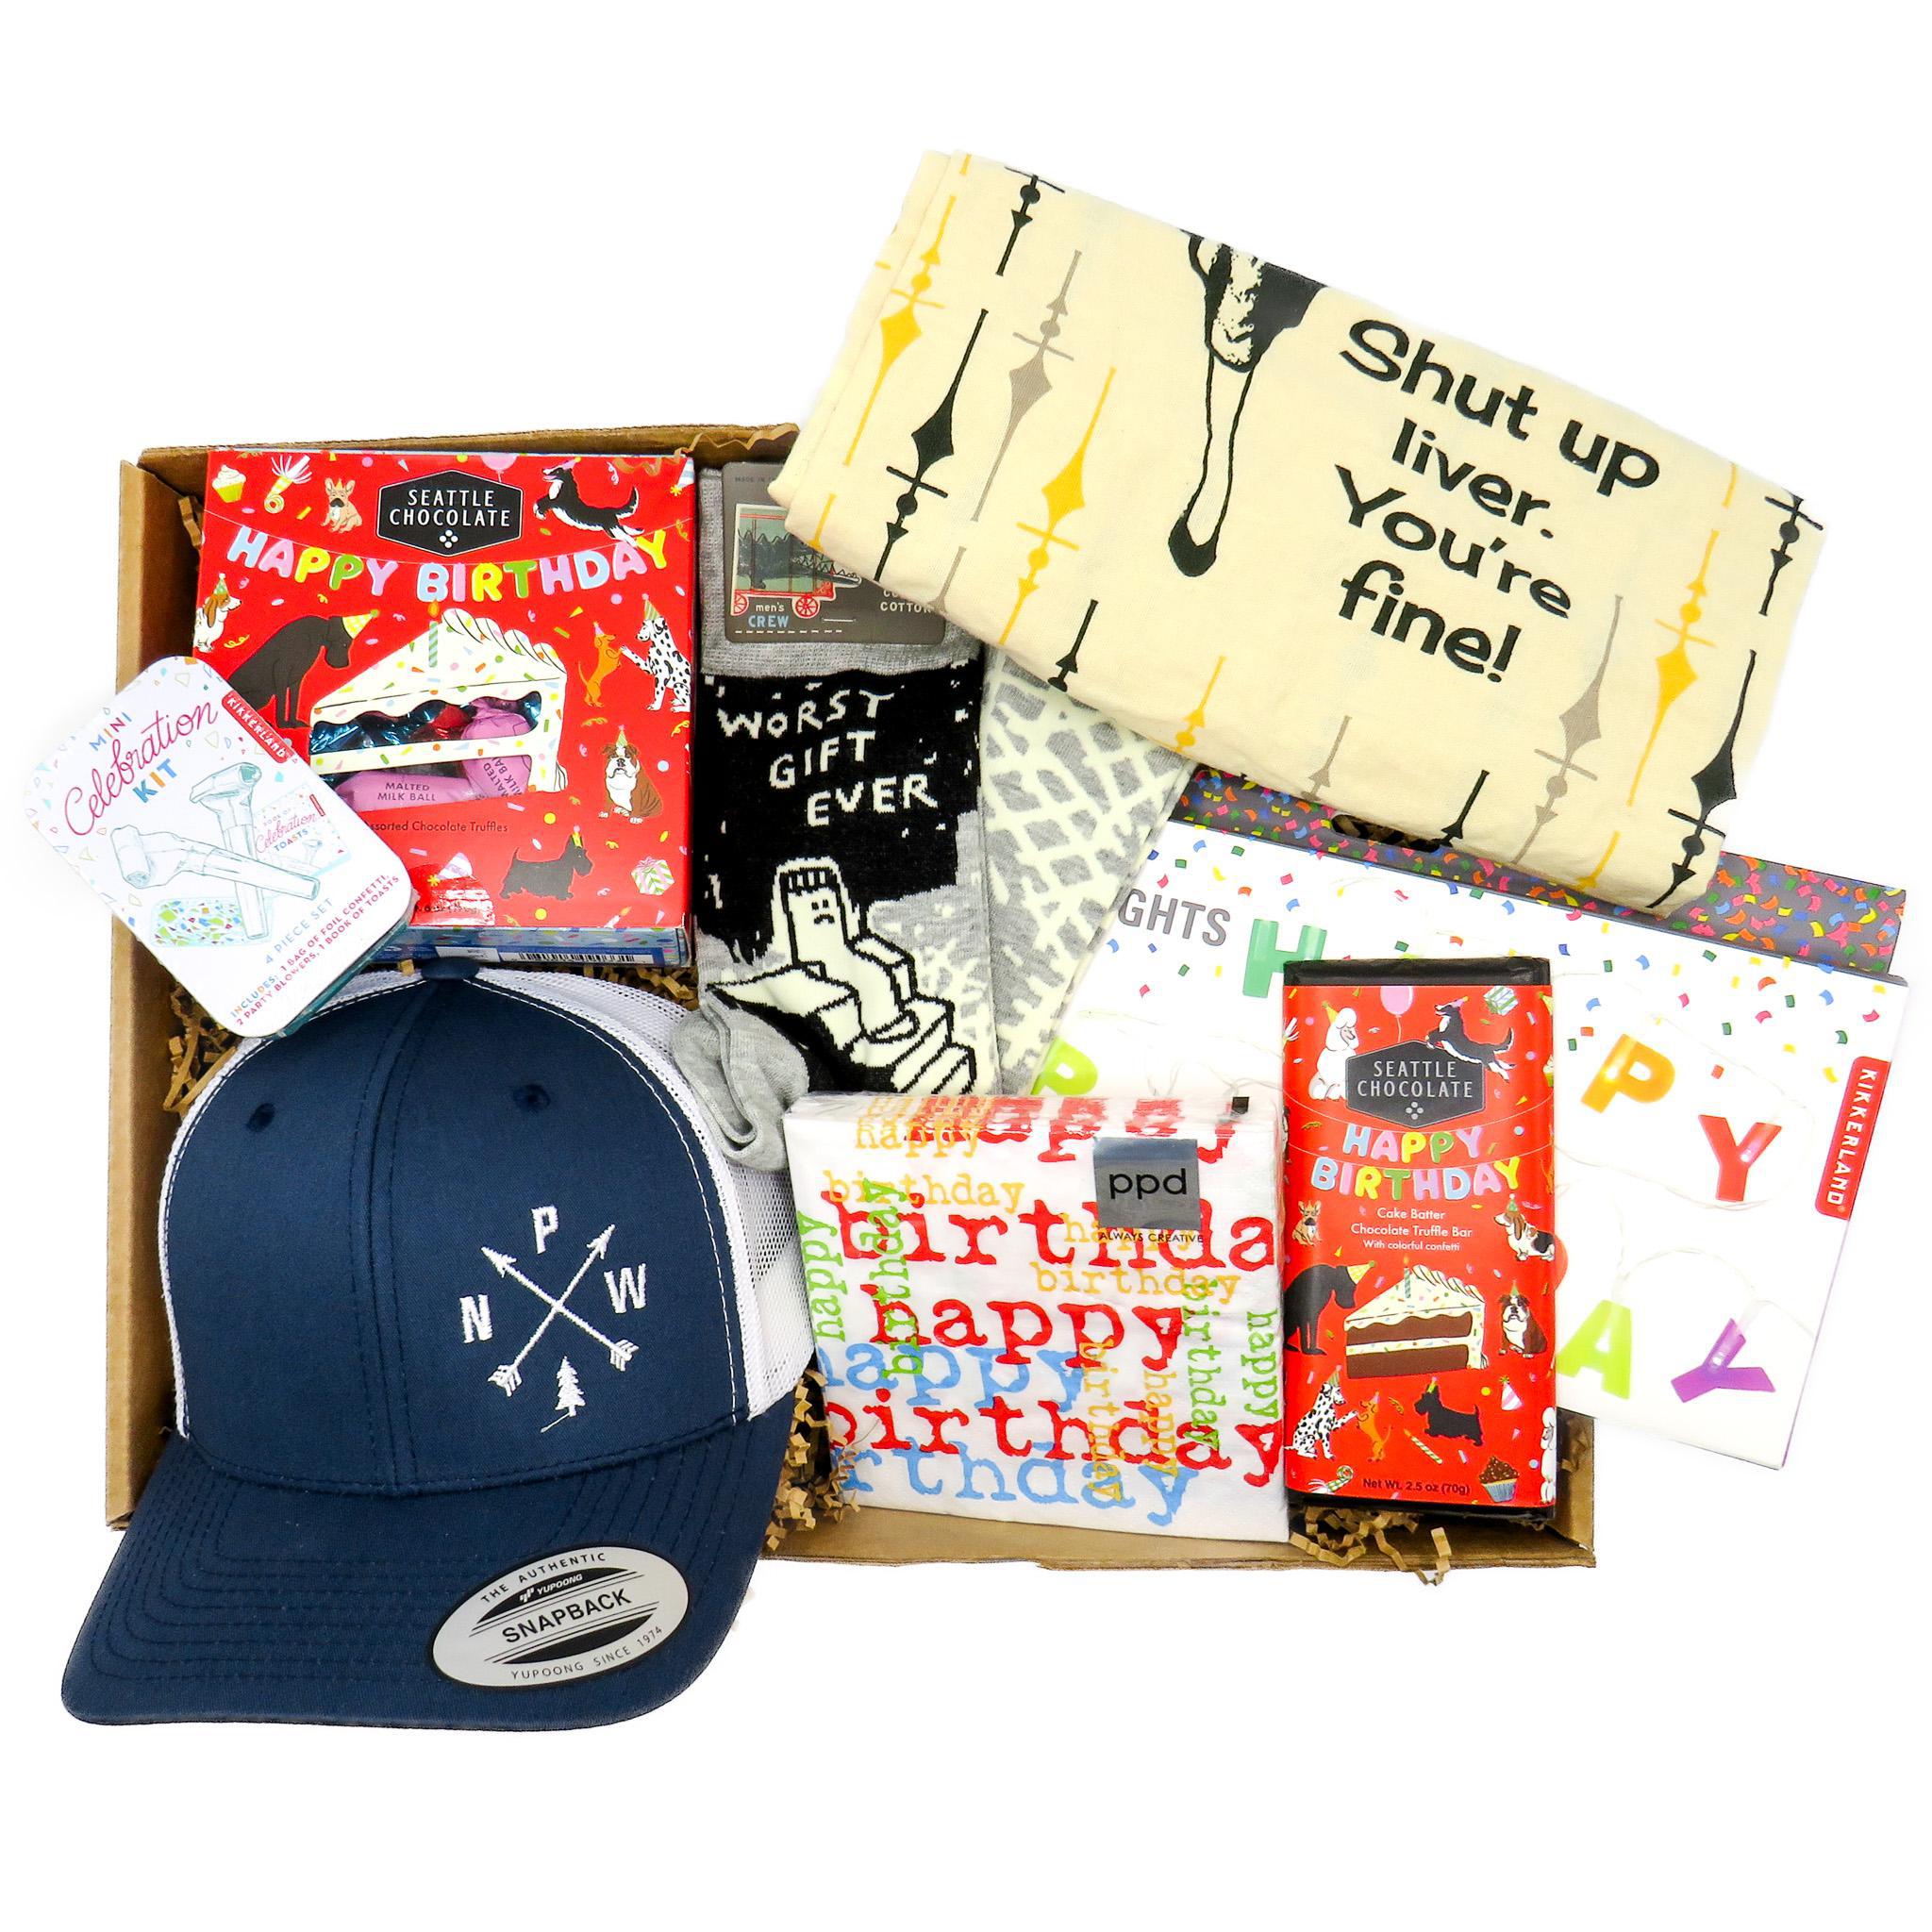 Birthday gift set for him: Includes a stylish cap, mini celebration kit, box of chocolates, quirky pair of socks, a humorous towel, a chocolate bar, happy birthday napkins and happy birthday string lights. 